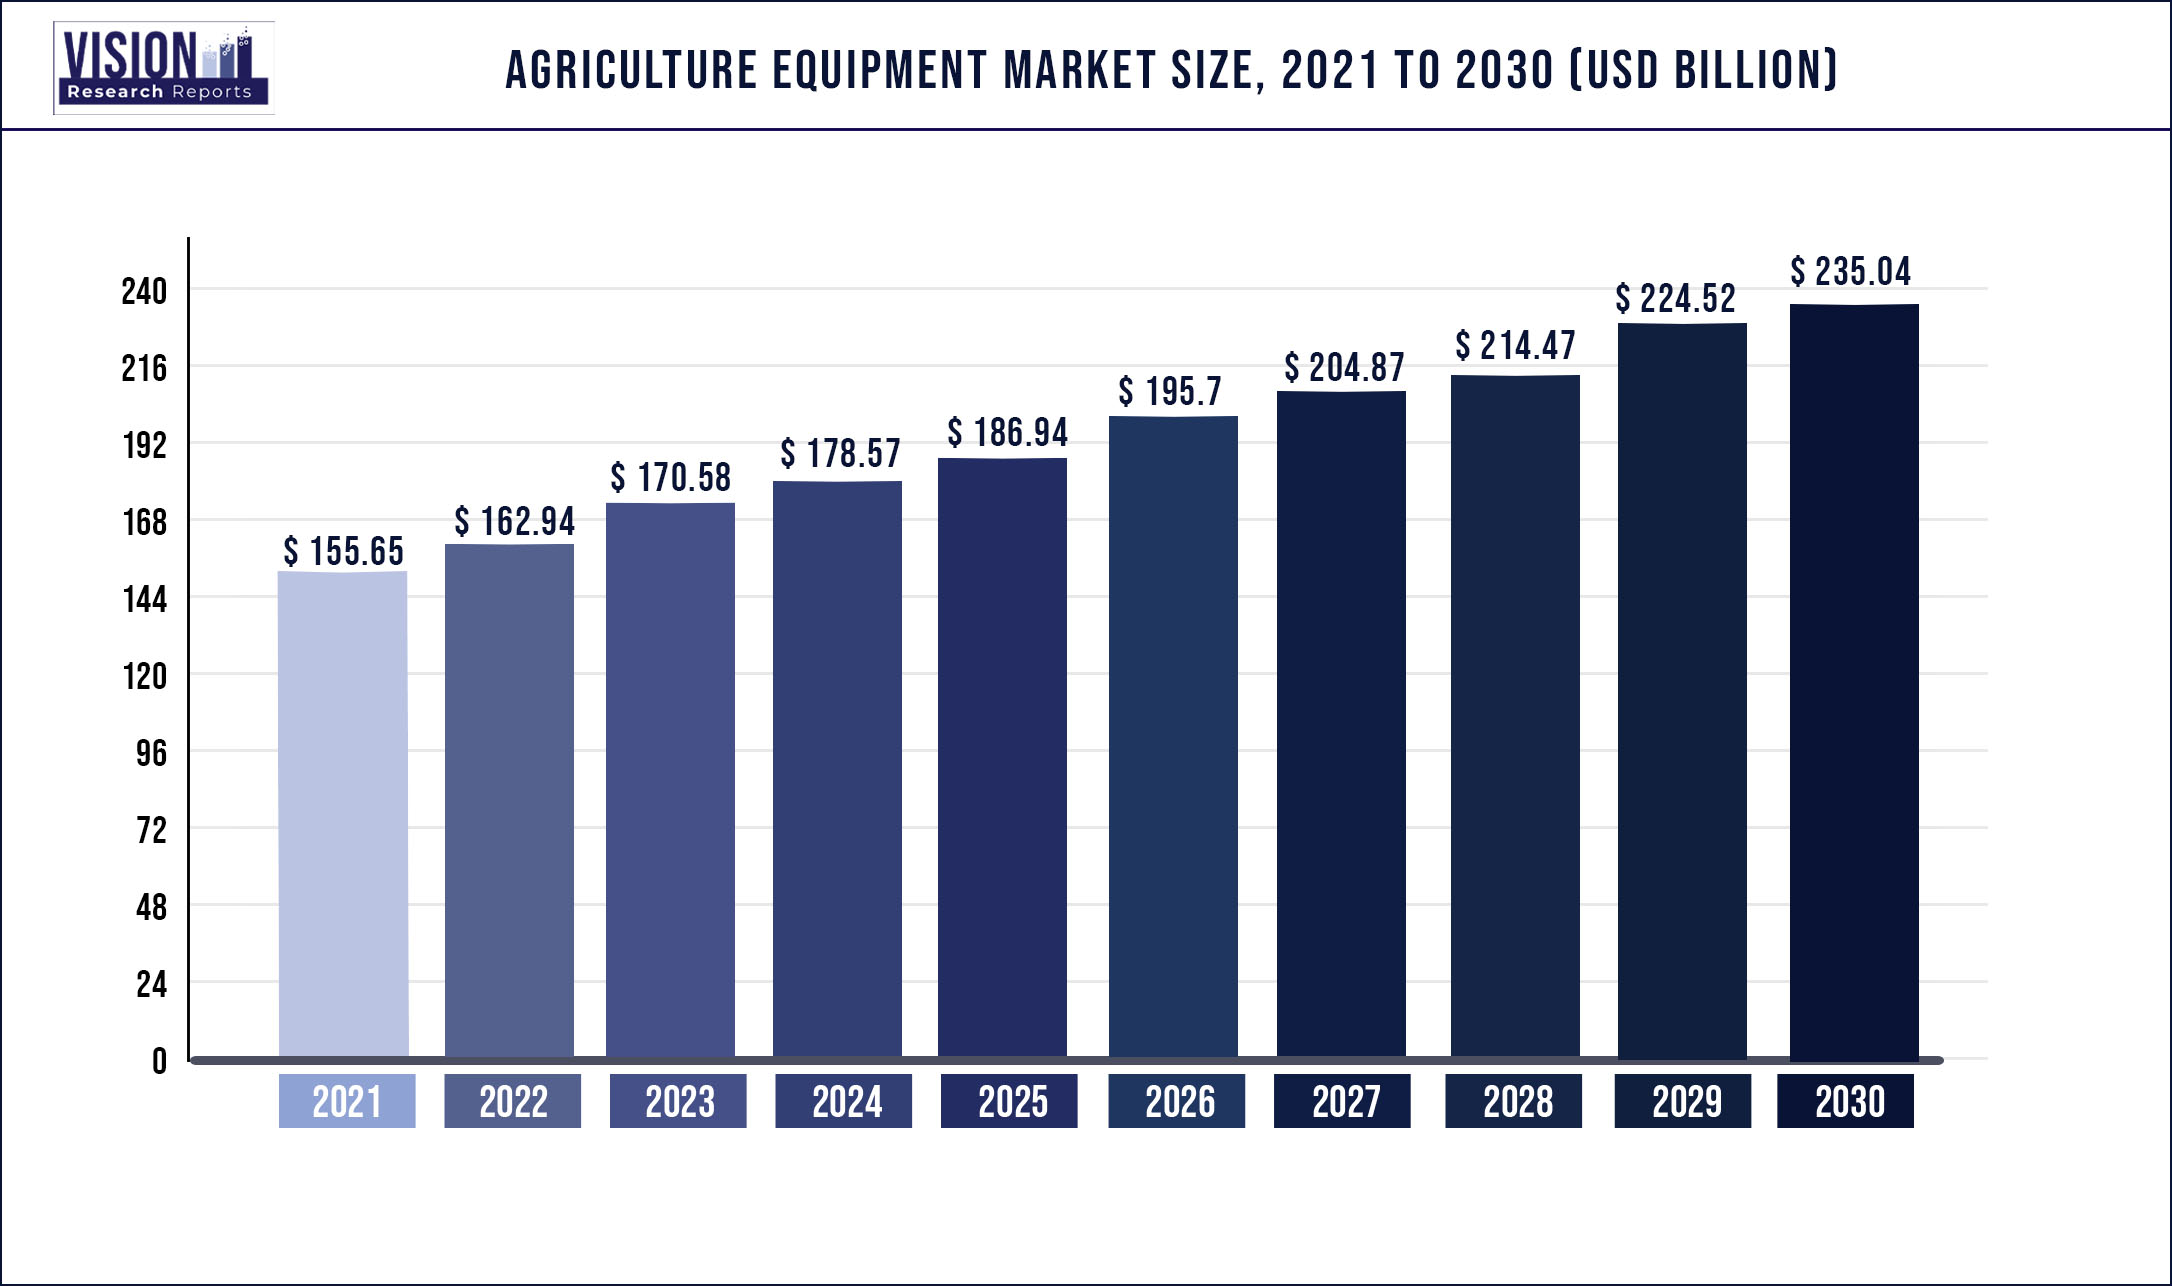 Agriculture Equipment Market Size 2021 to 2030